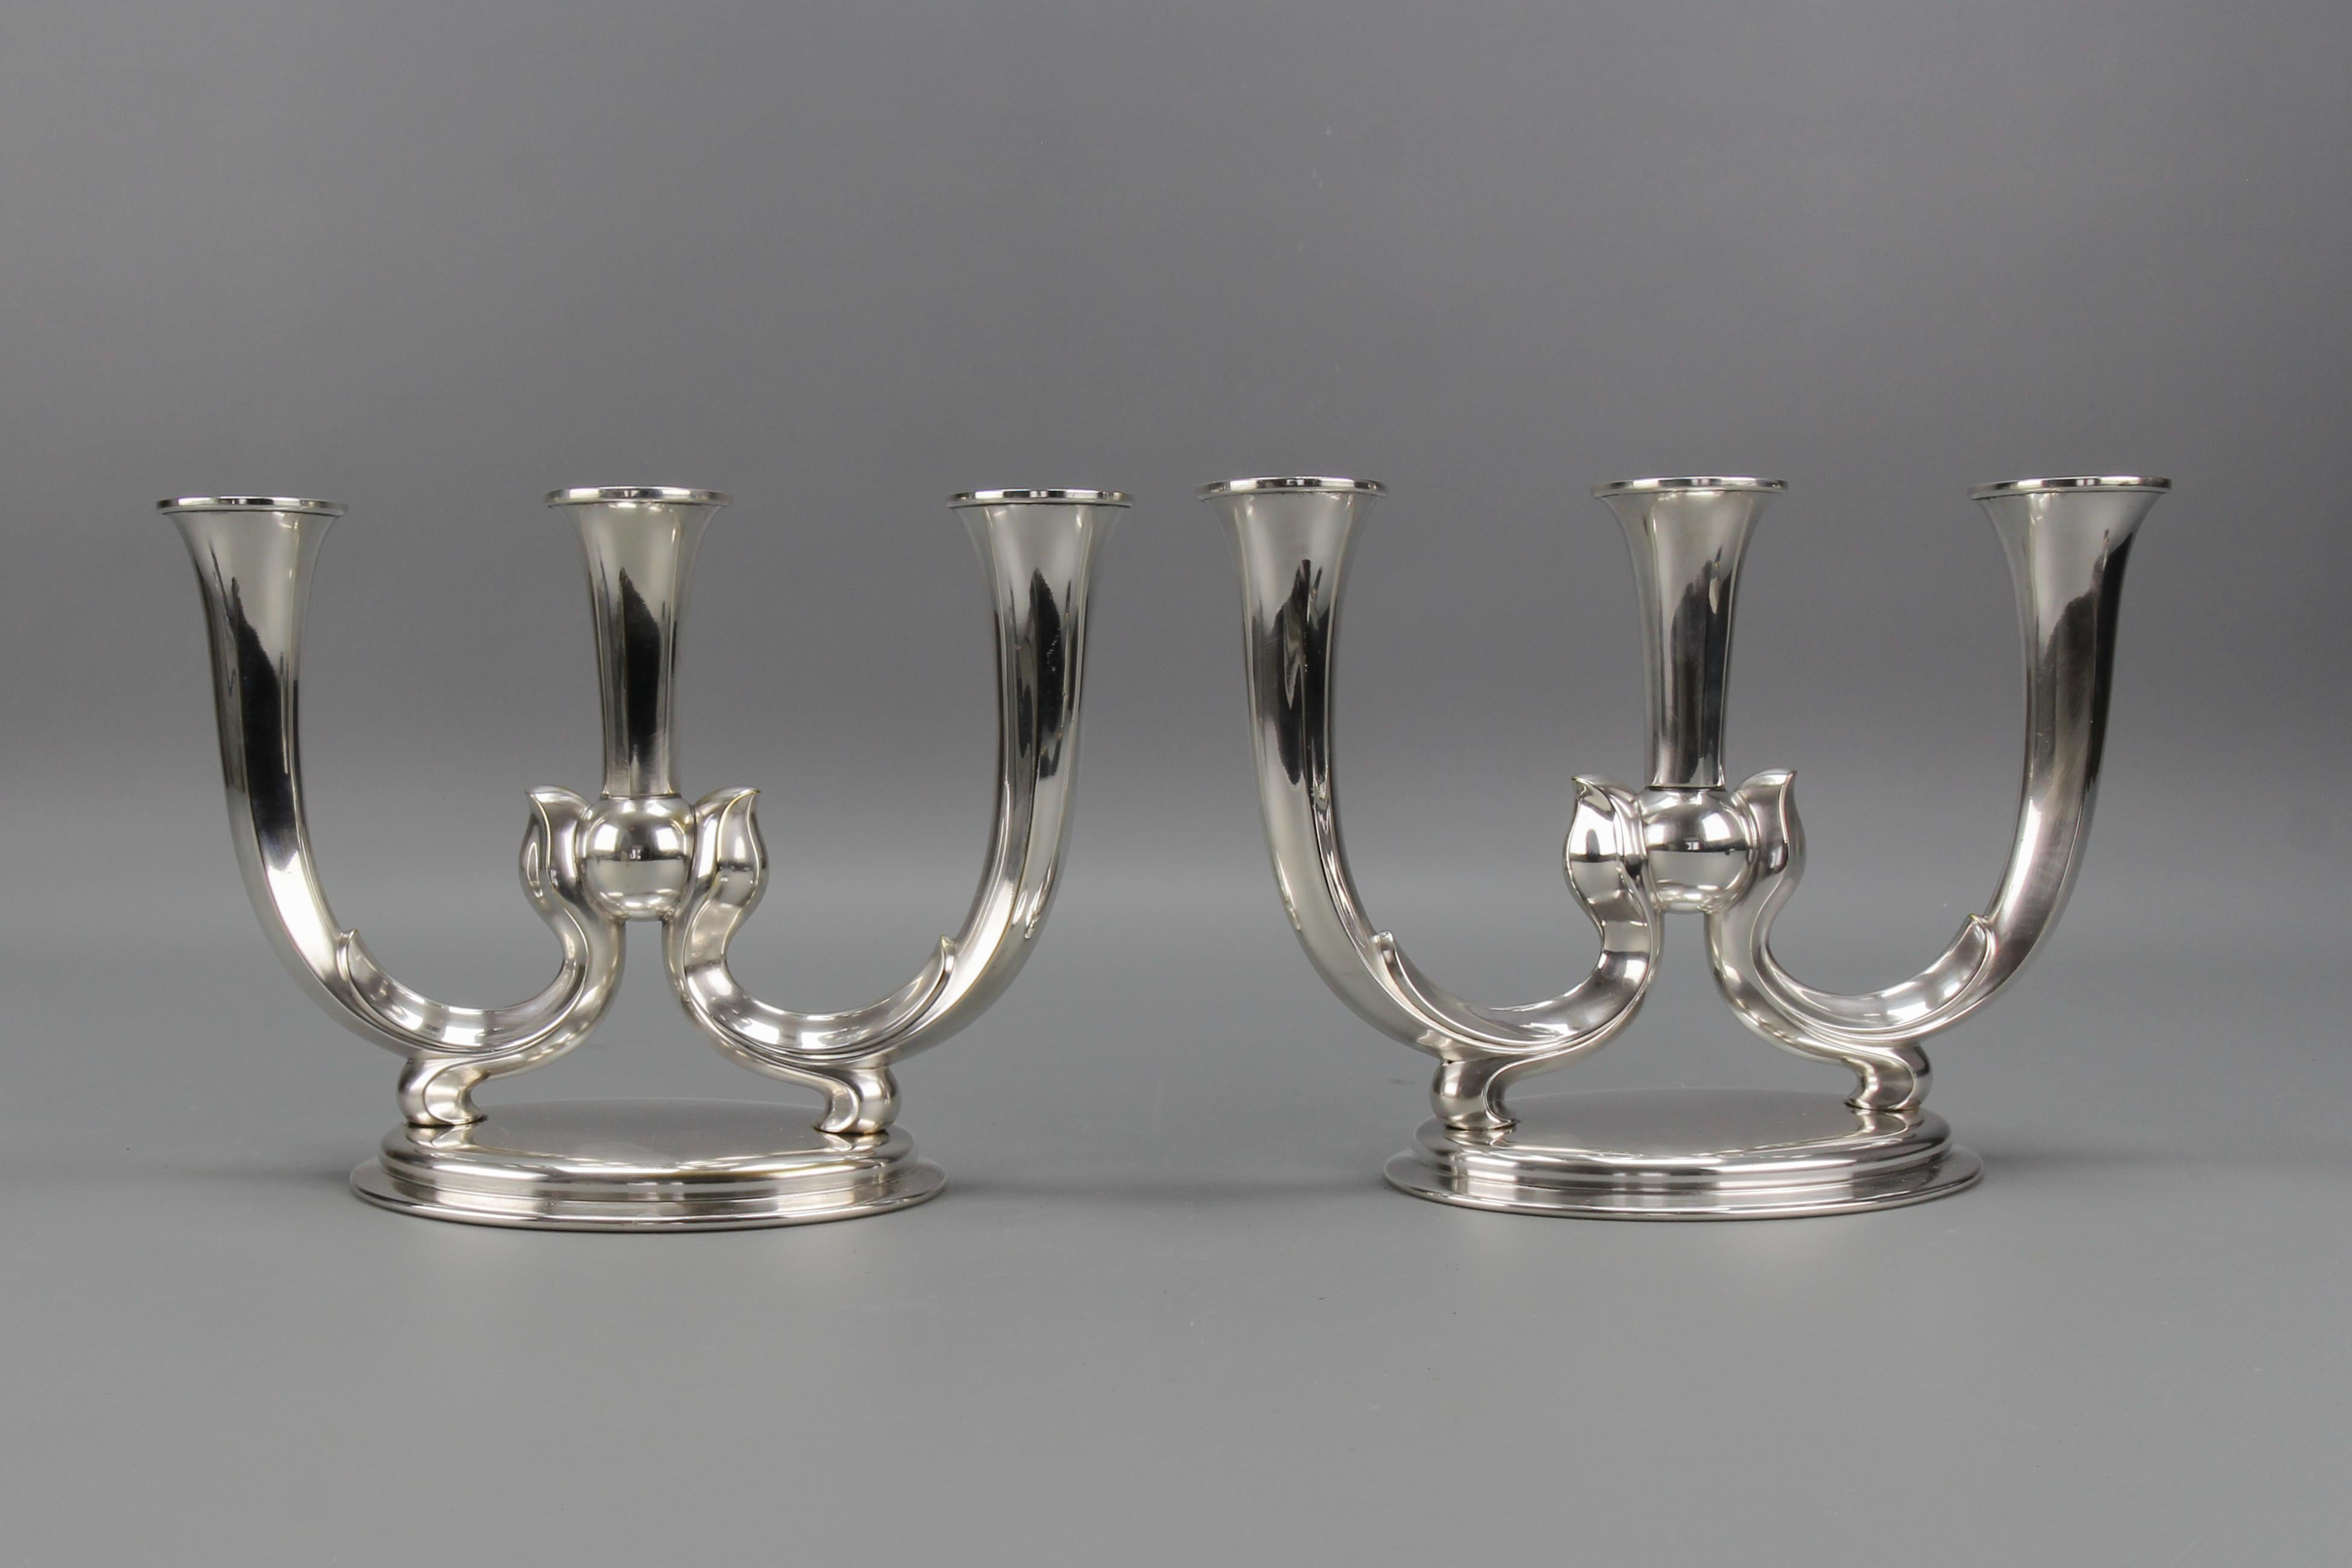 Pair of German WMF Art Deco Three-Arm Candle Holders For Sale 1